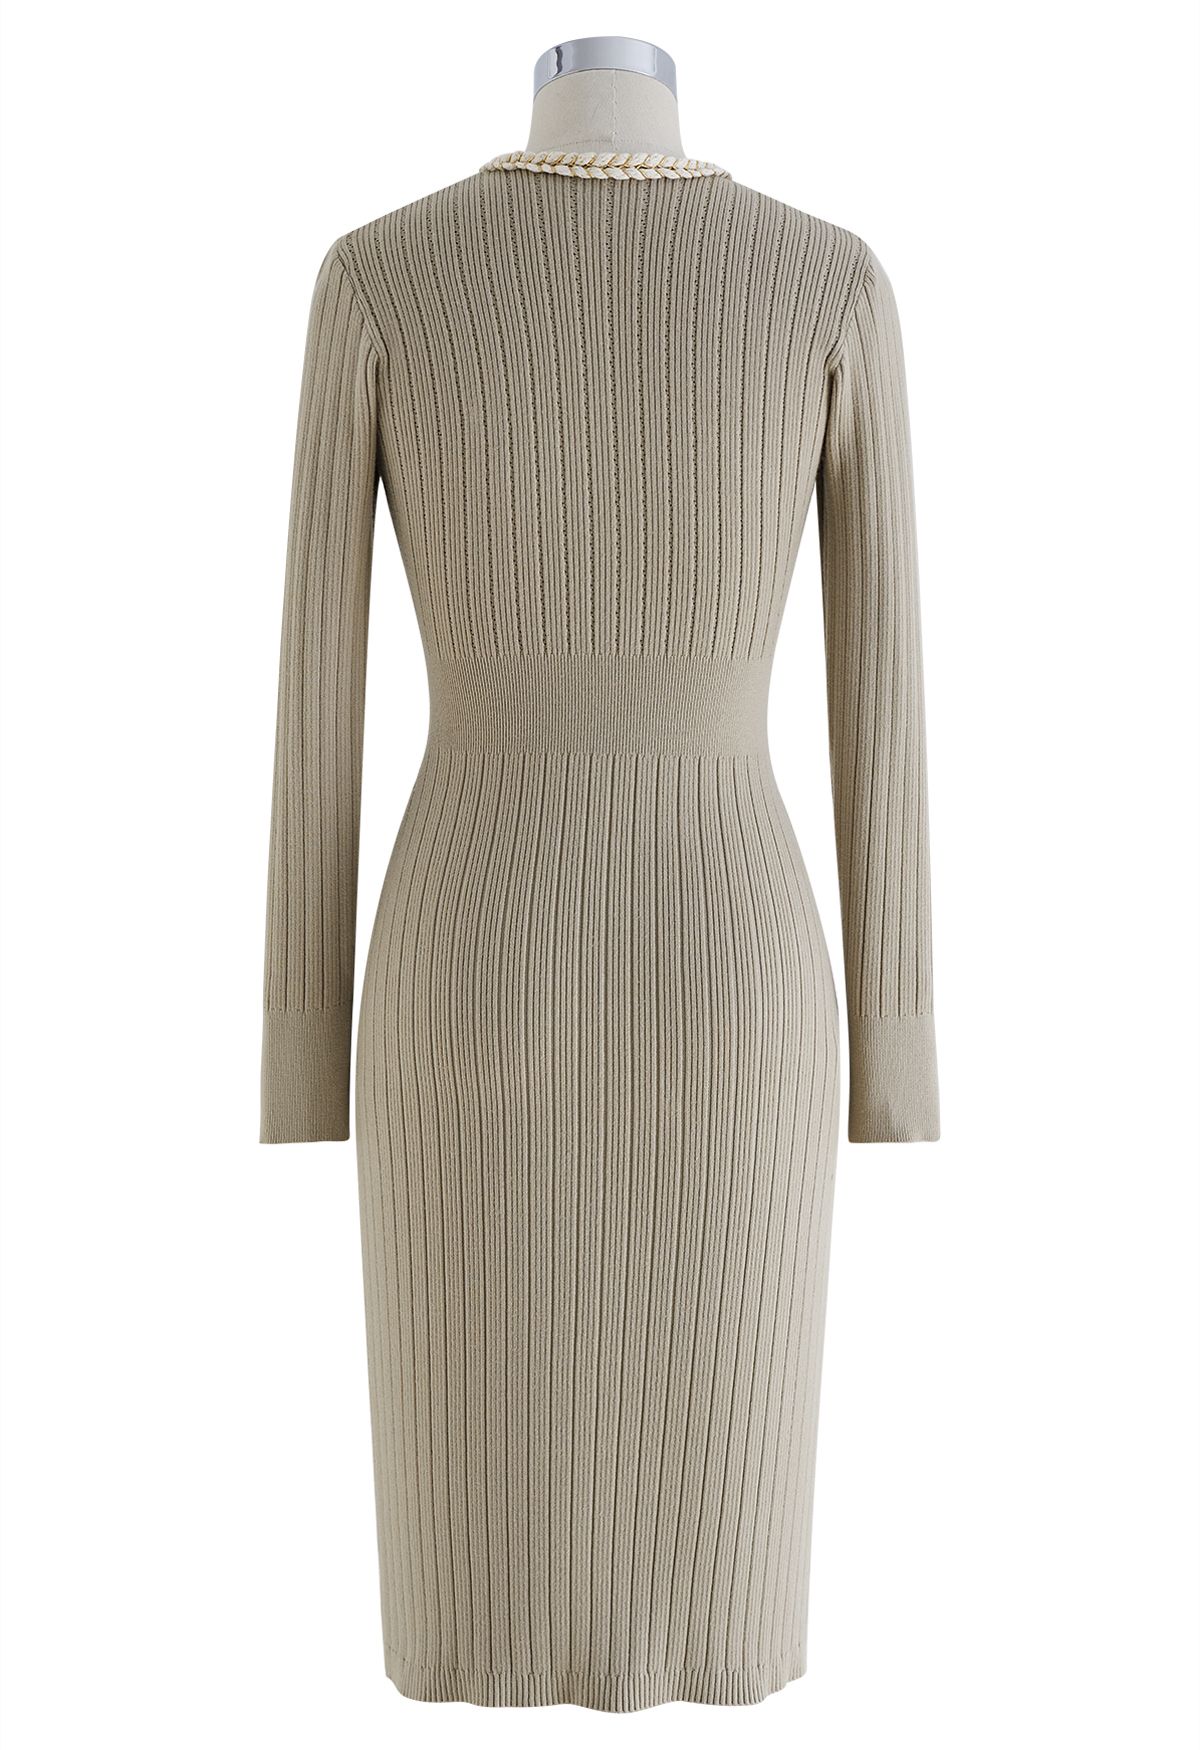 Braided Edge Golden Button Bodycon Knit Dress in Oatmeal